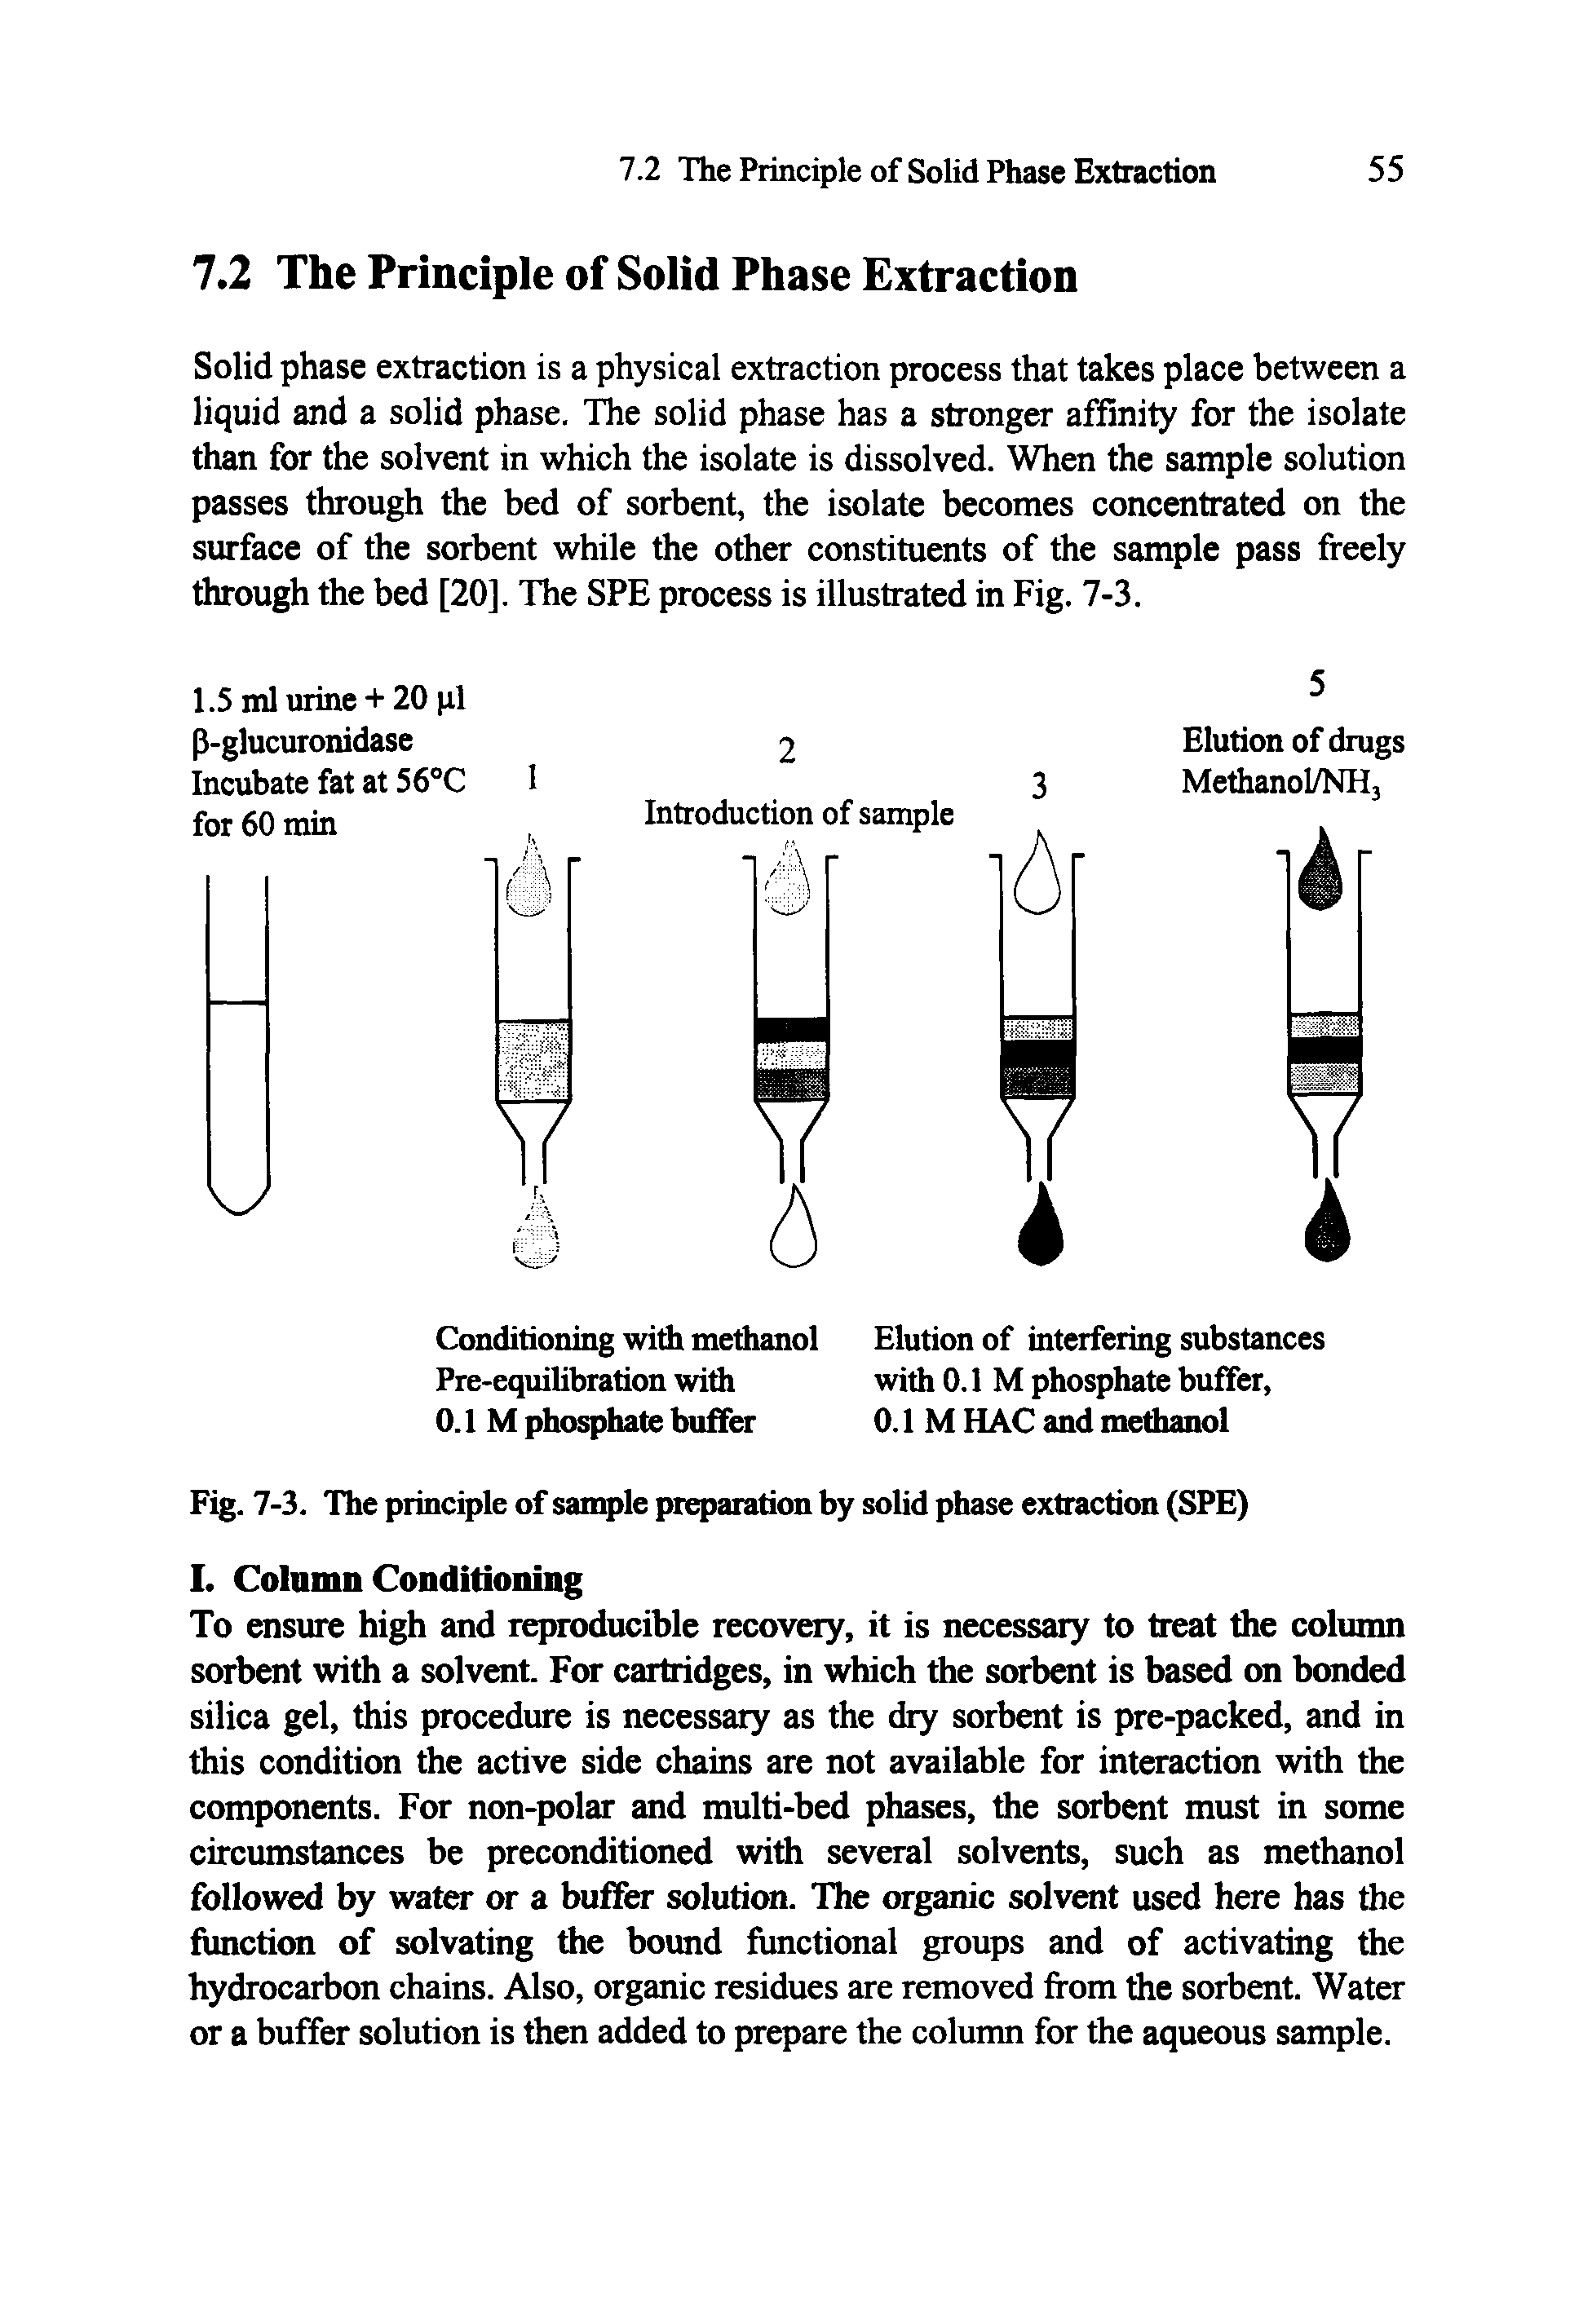 Fig. 7-3. The principle of sample preparation by solid phase extraction (SPE)...